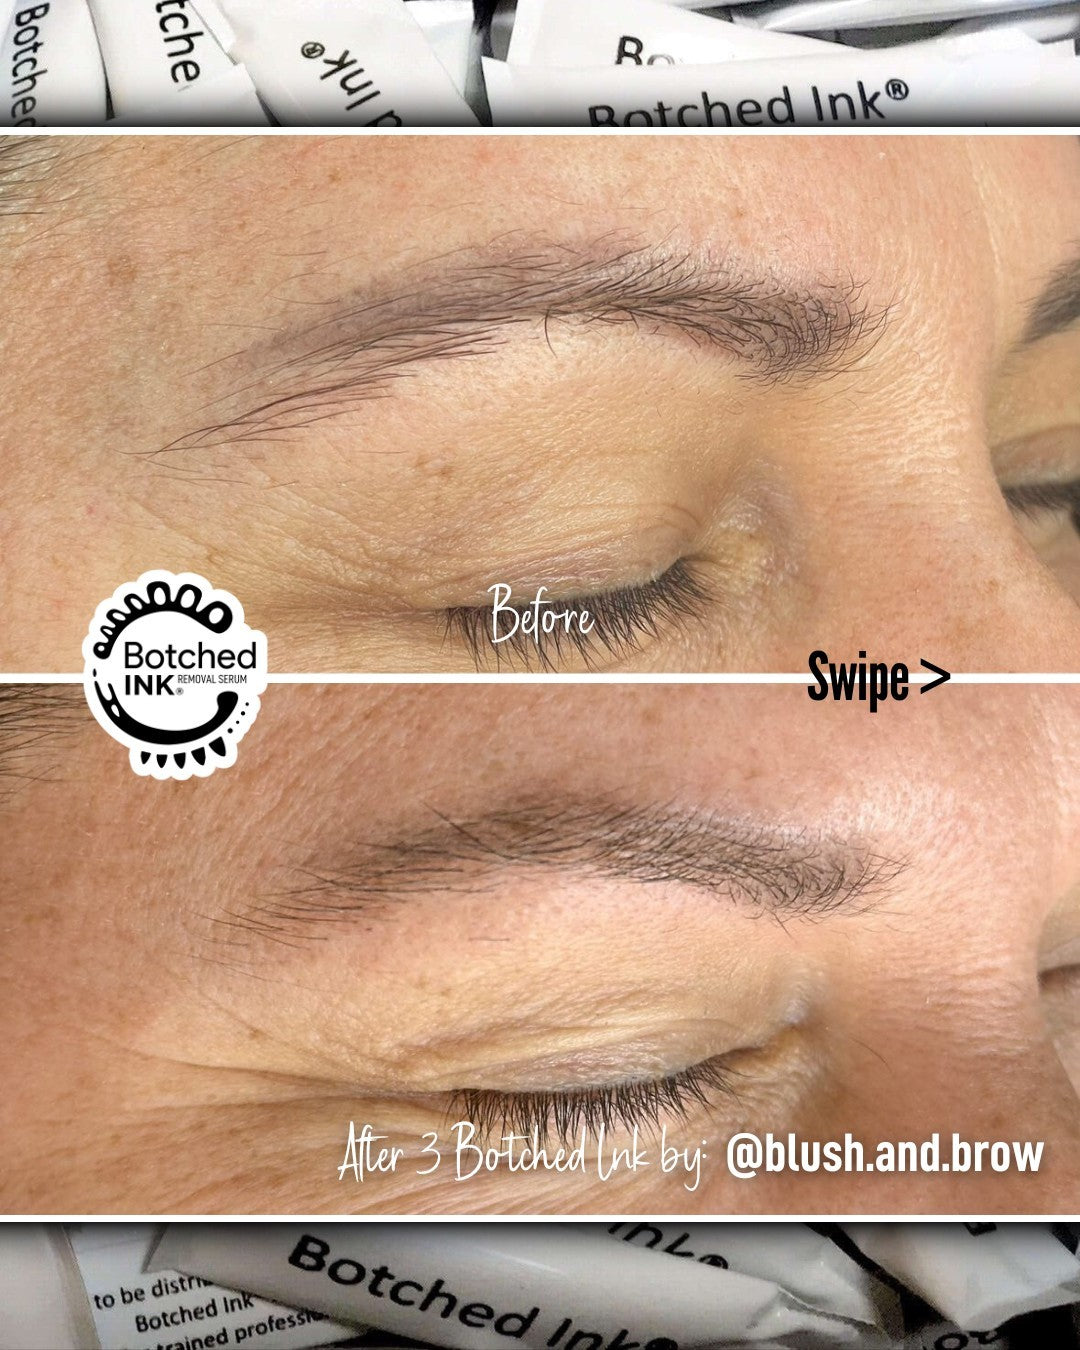 Botched Ink online saline removal training microblading PMU eyebrow tattoo removal